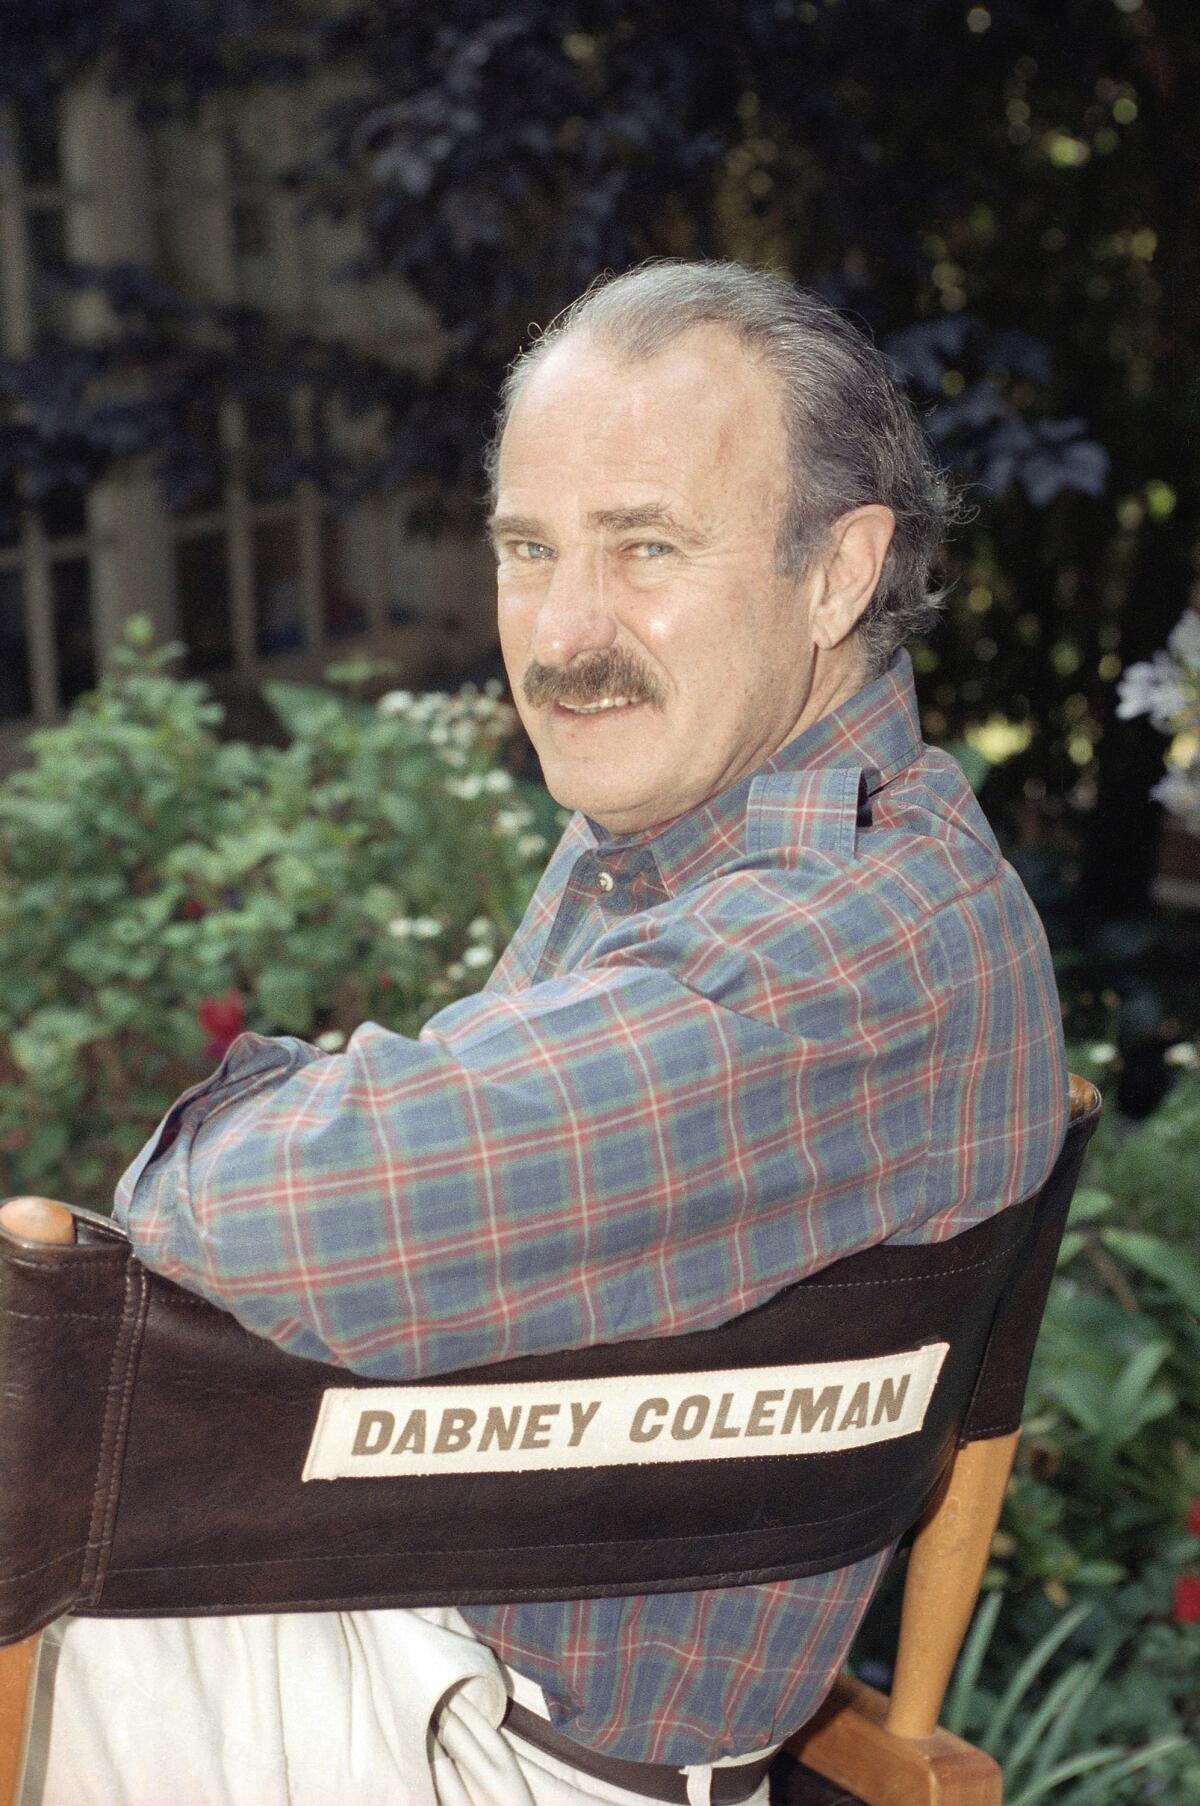 Dabney Coleman sits in a directors chair with his name on it